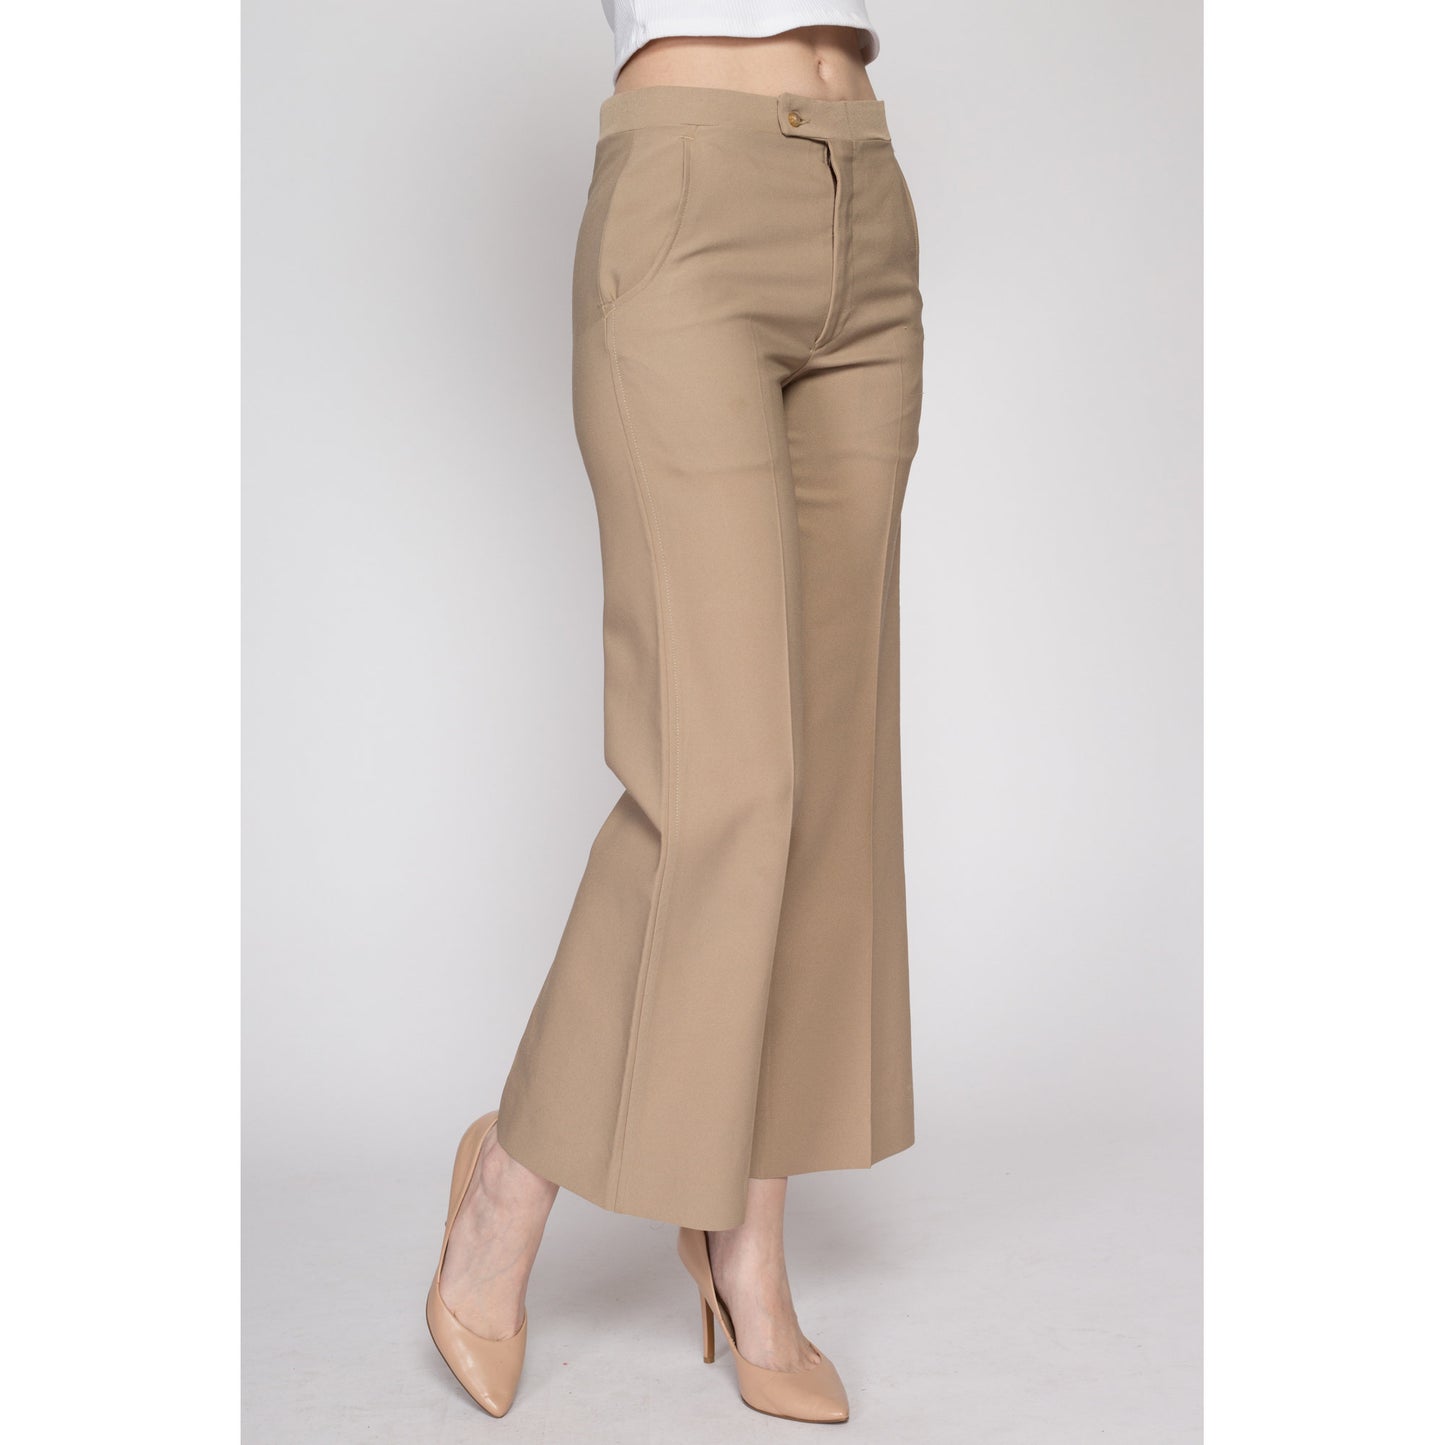 Small 70s Tan Mid Rise Flared Pants | Vintage Haggar Flares Retro Polyester Trousers